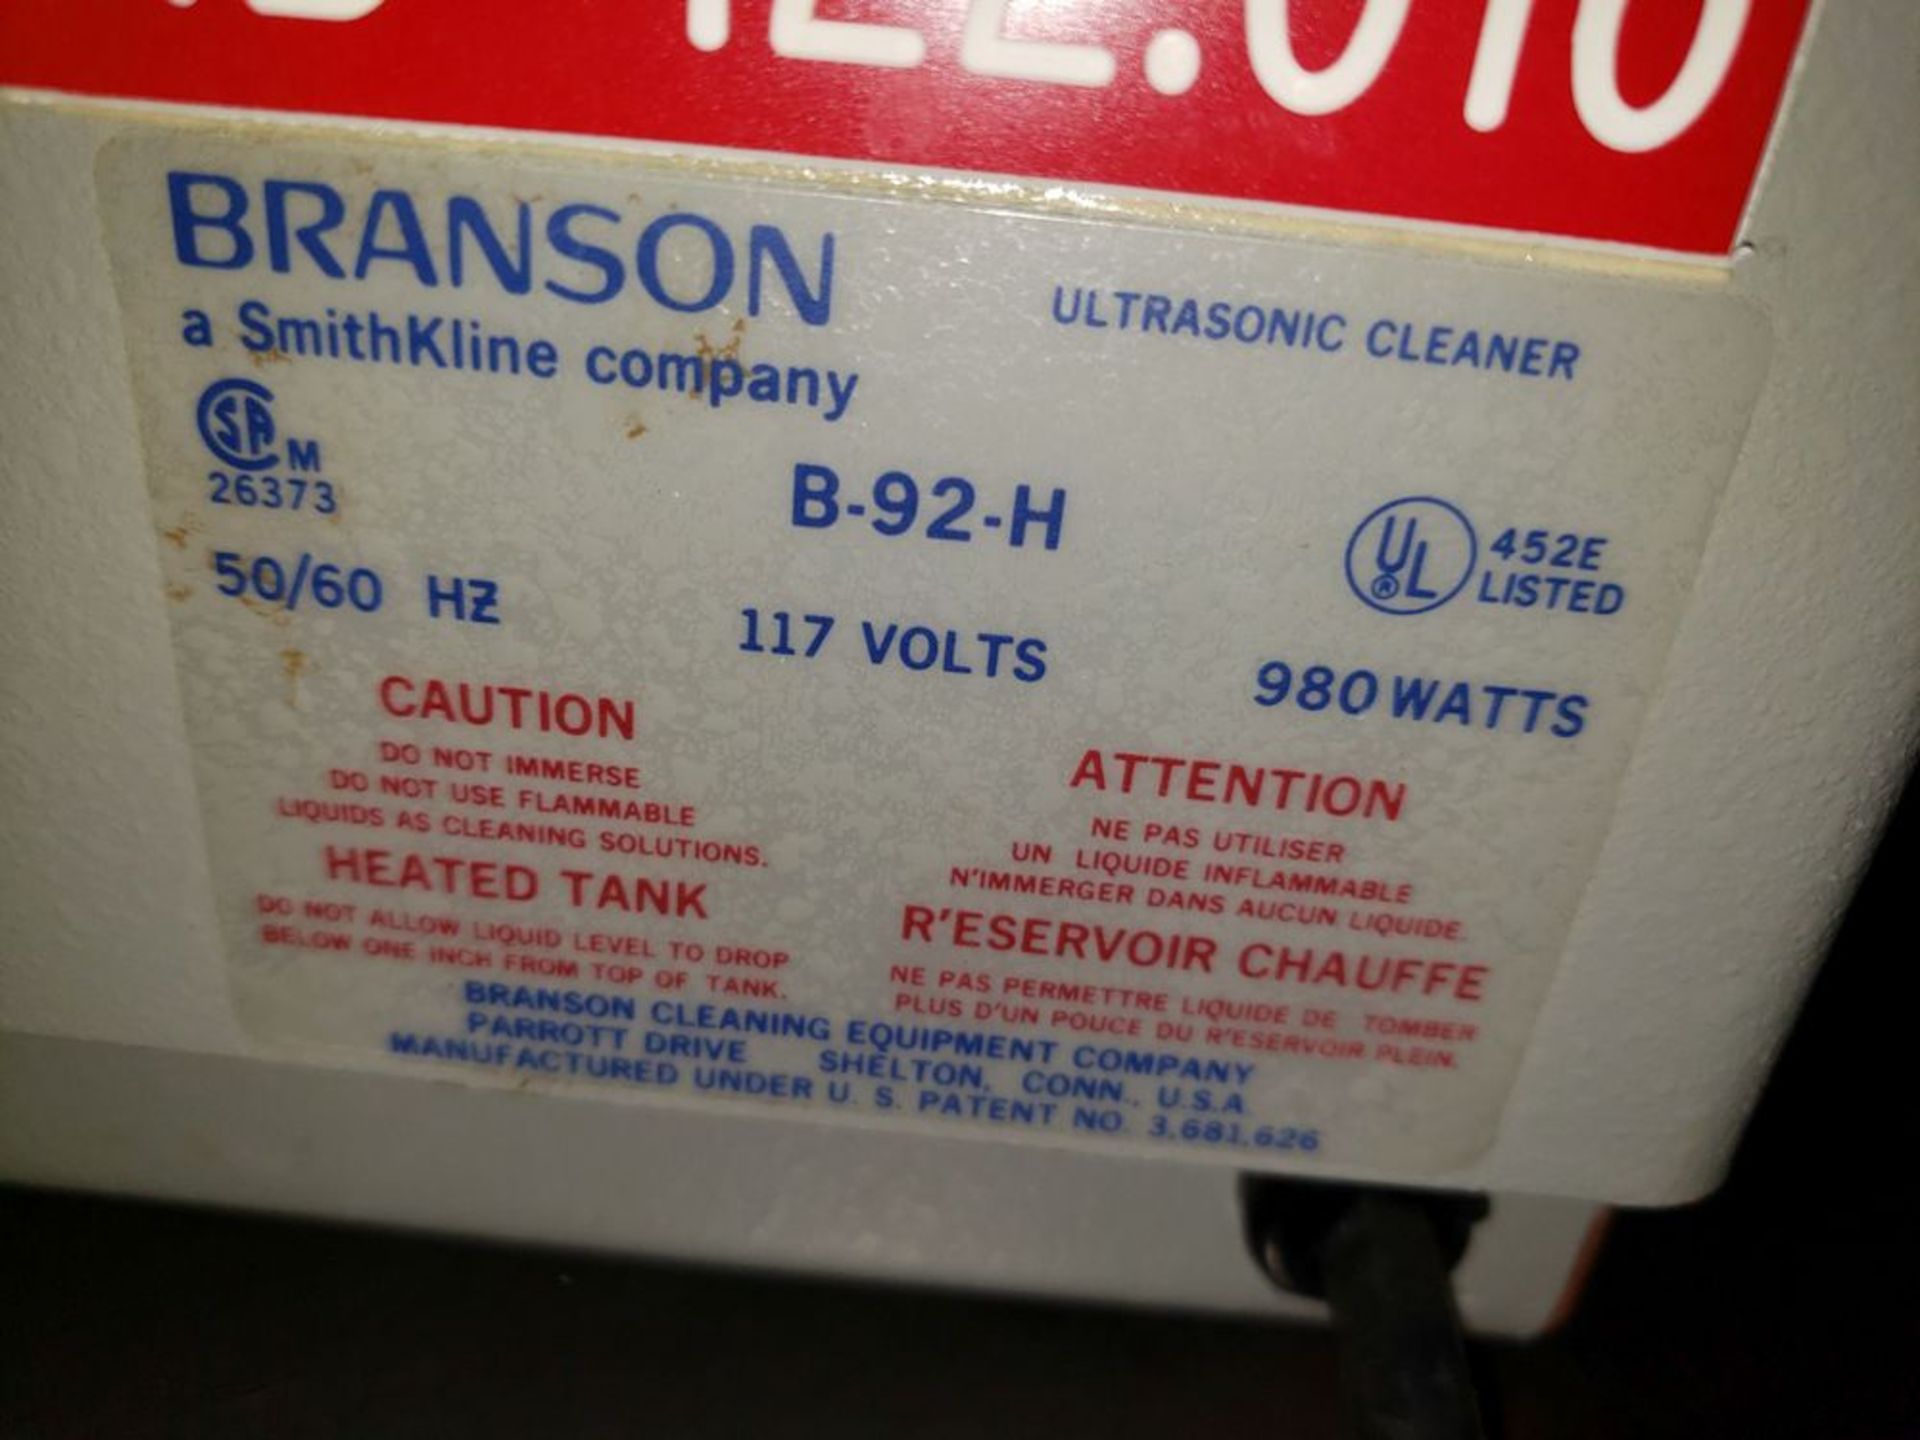 Branson Ultrasonic Cleaner, Model B-92-H, with (2) baskets - Image 3 of 8